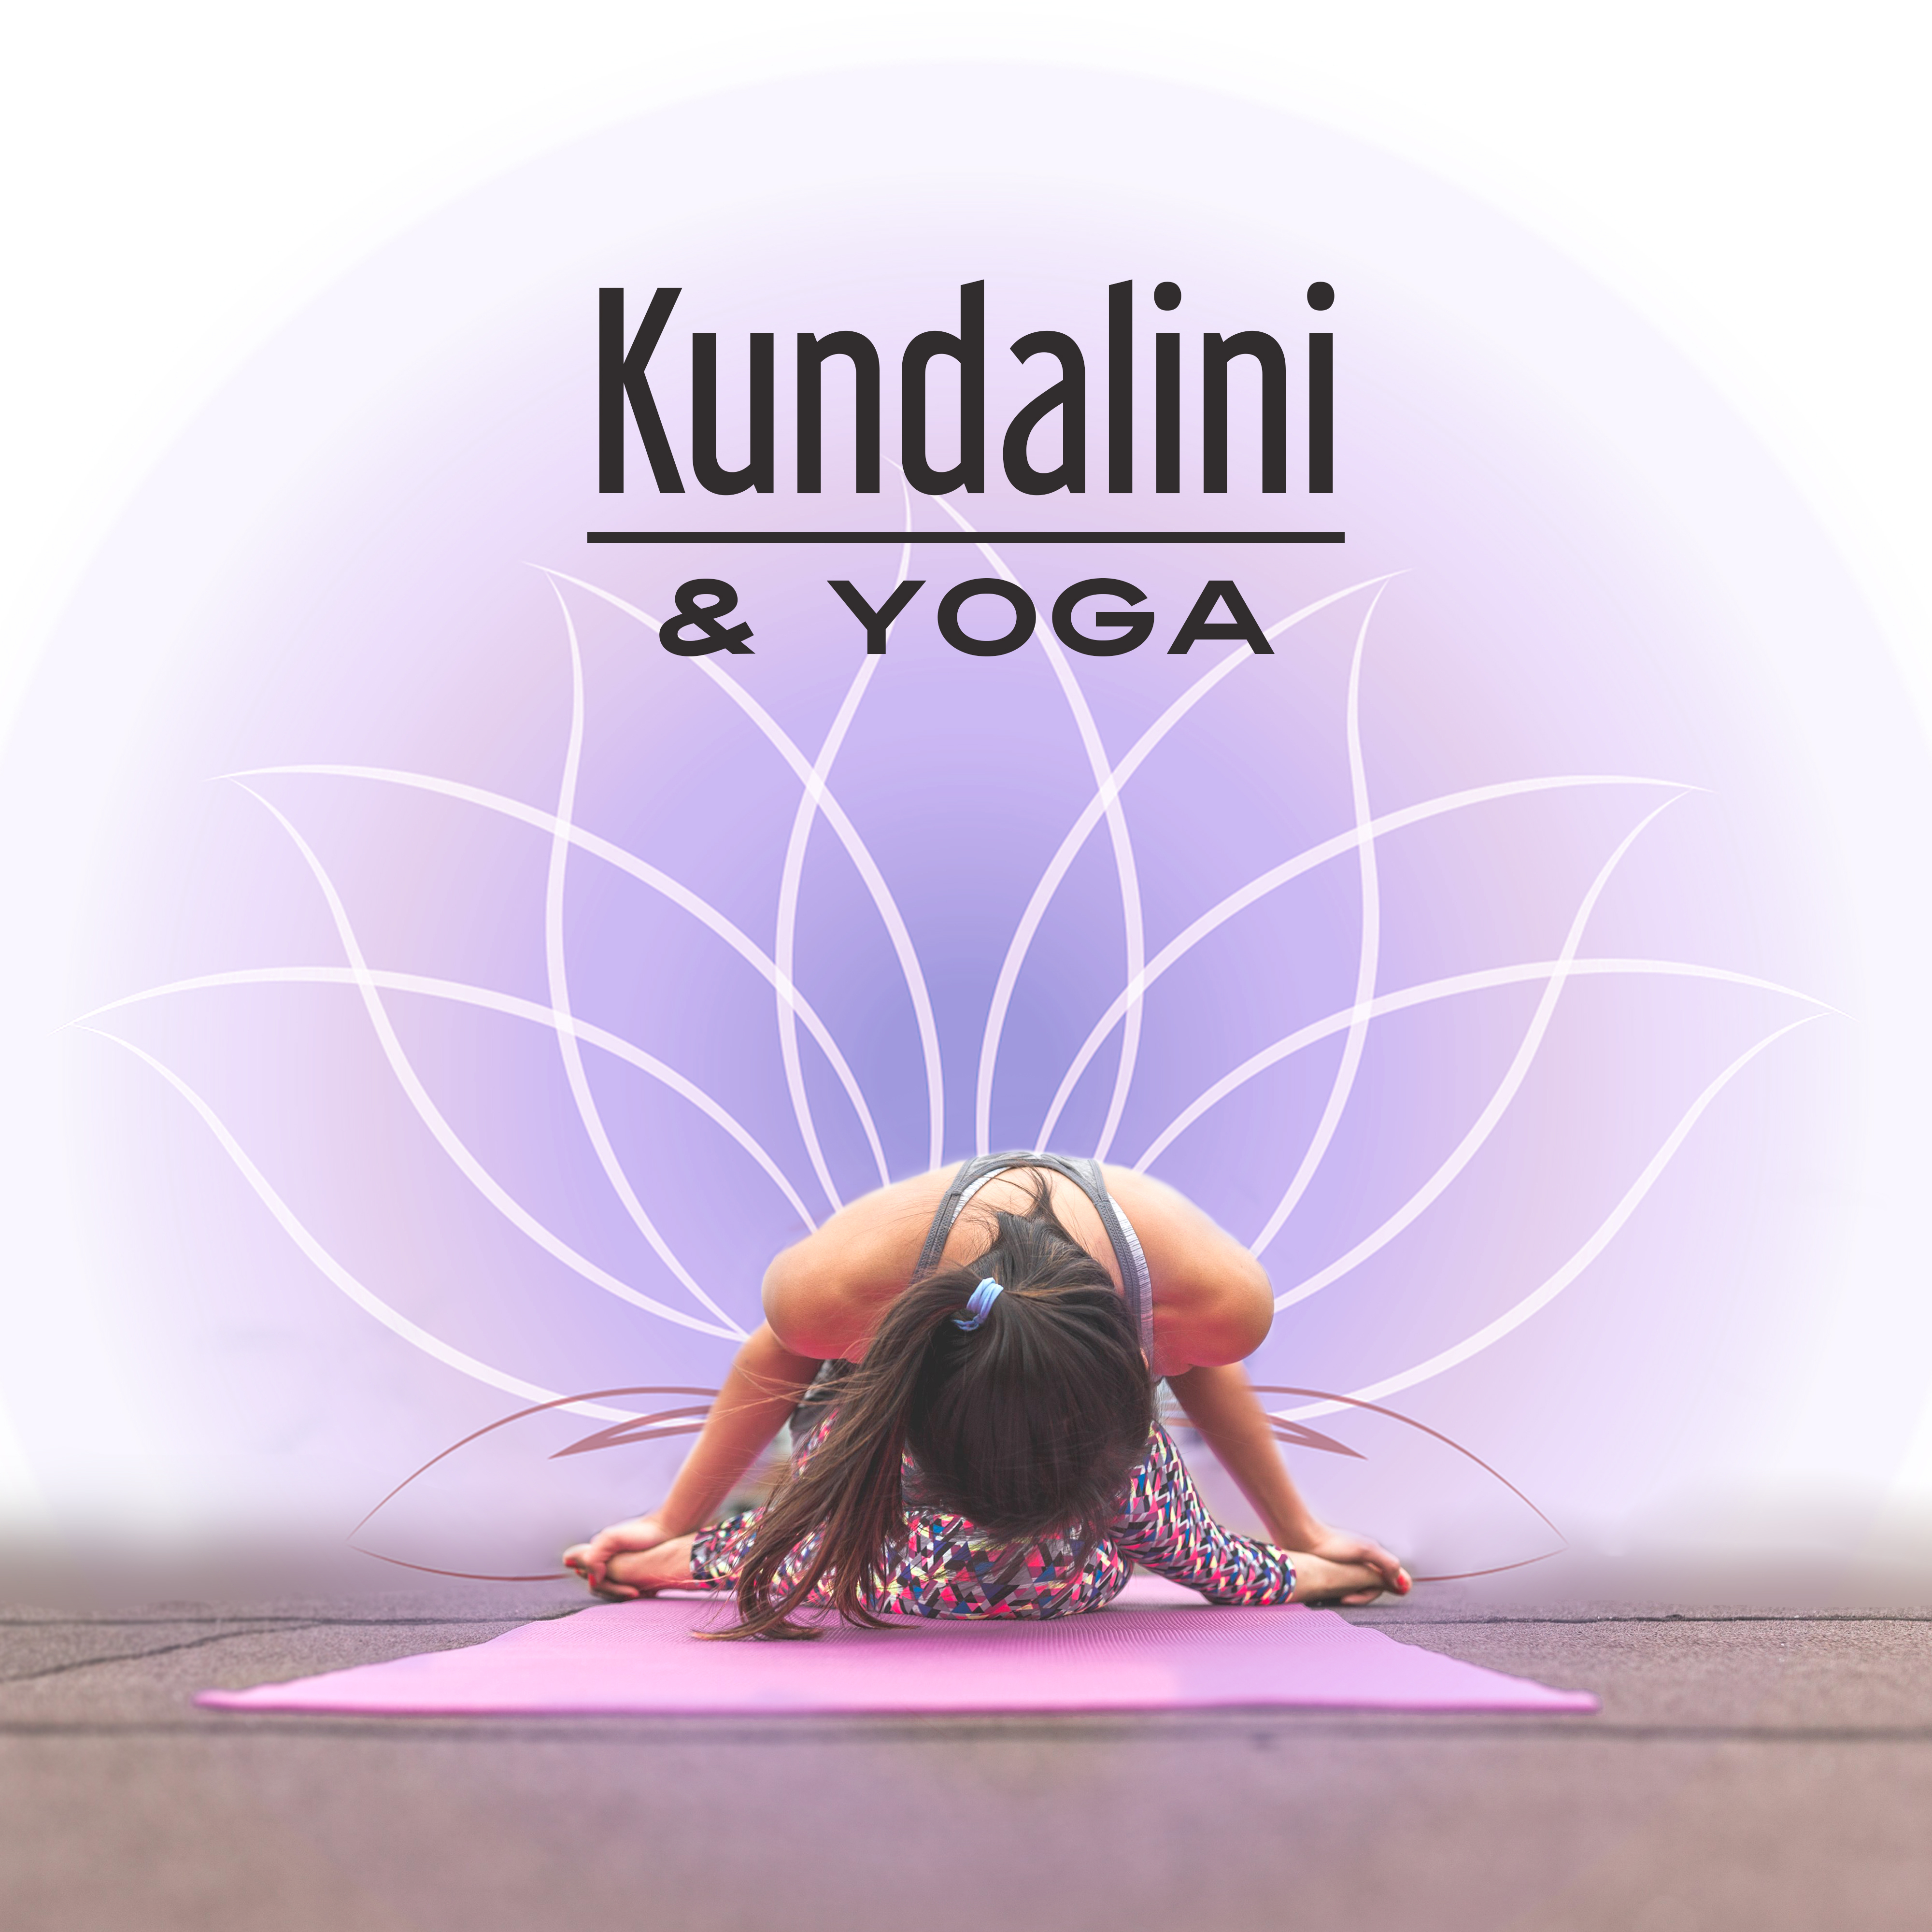 Kundalini & Yoga – Zen Music for Relaxation, Nature Sounds, Deep Meditation, Sounds of Yoga, Contemplation of Nature, Tranquility & Harmony